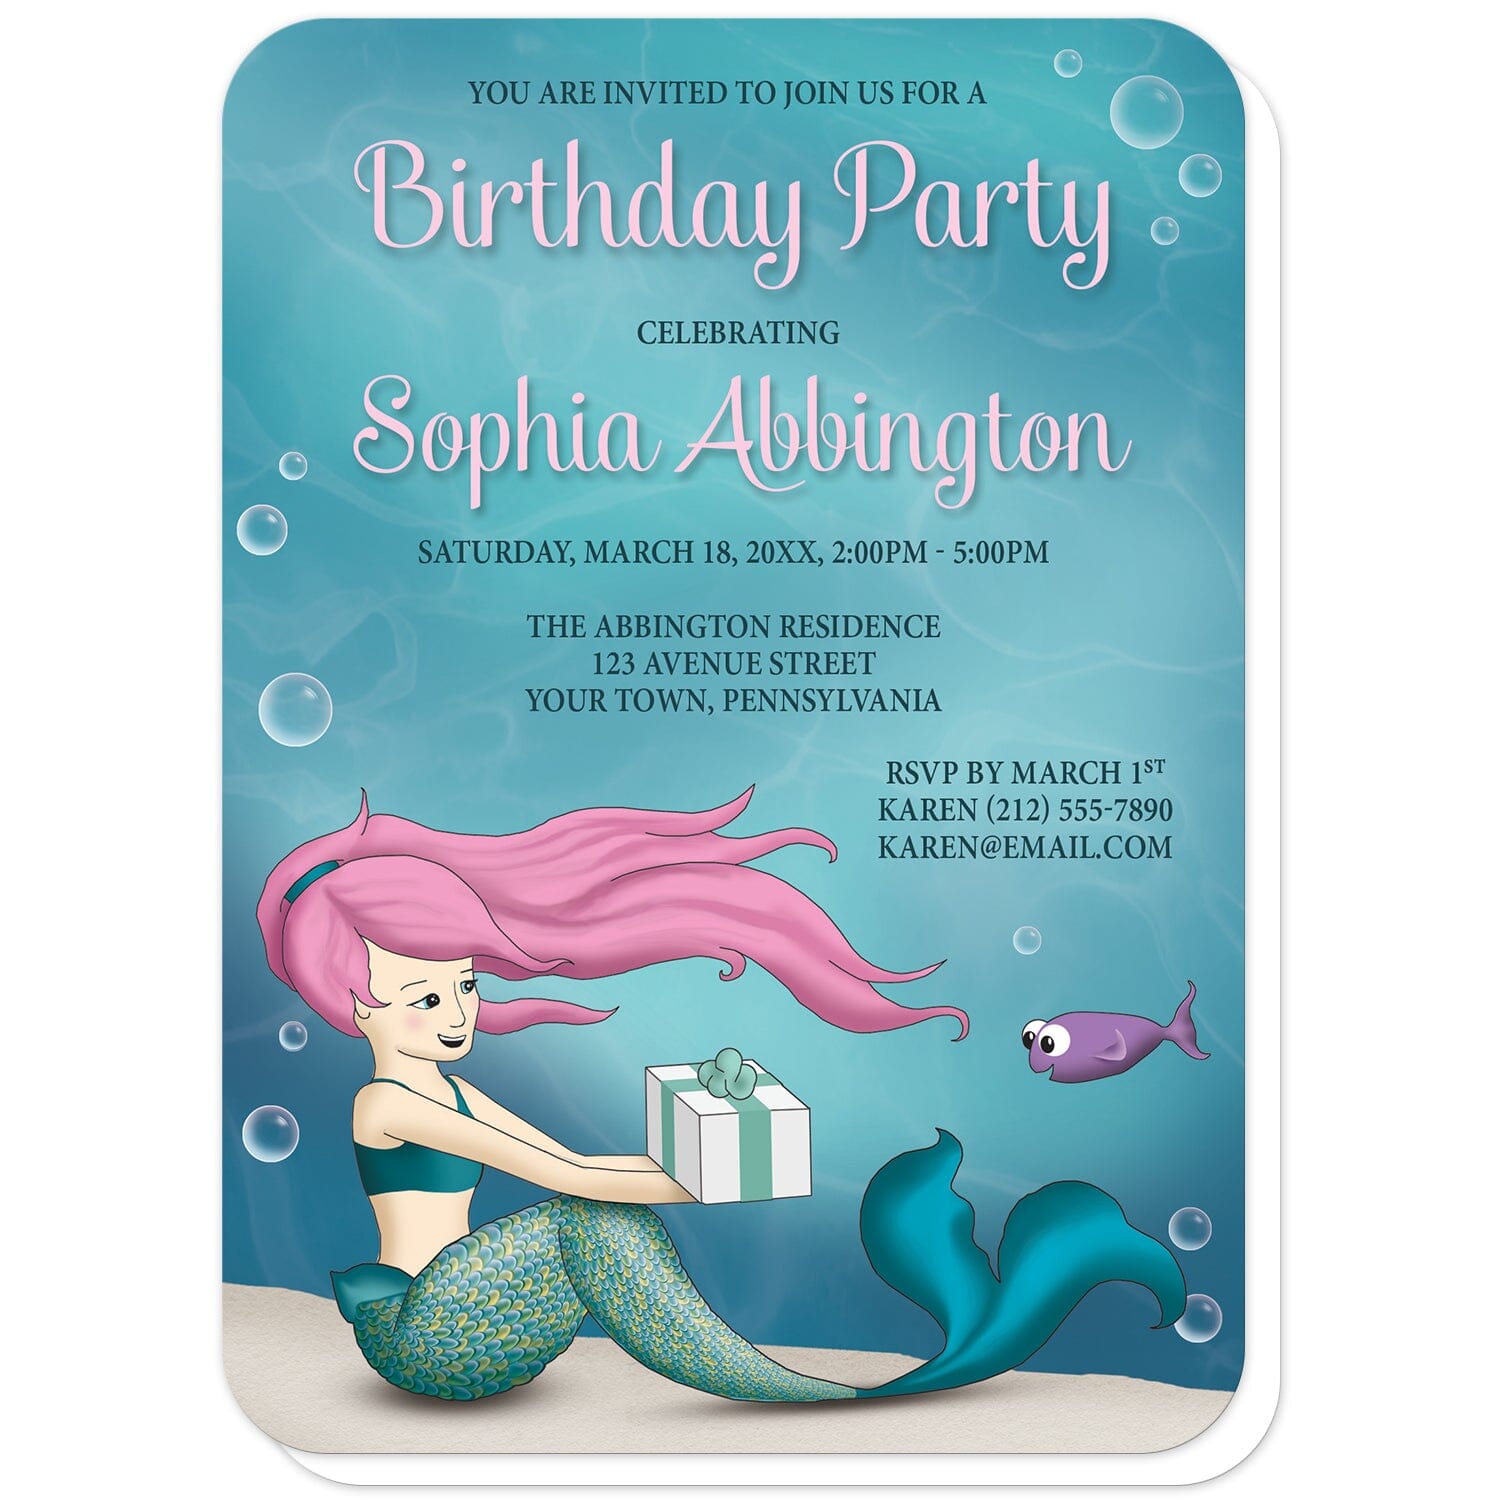 Under the Sea Mermaid Birthday Party Invitations (with rounded corners) at Artistically Invited. Uniquely illustrated under the sea mermaid birthday party invitations with a mermaid with pink hair receiving a gift from a happy little purple fish. This underwater illustration has an aqua blue water background sprinkled with whimsical bubbles. Your personalized birthday party celebration details are custom printed in pink and dark blue over the underwater design.